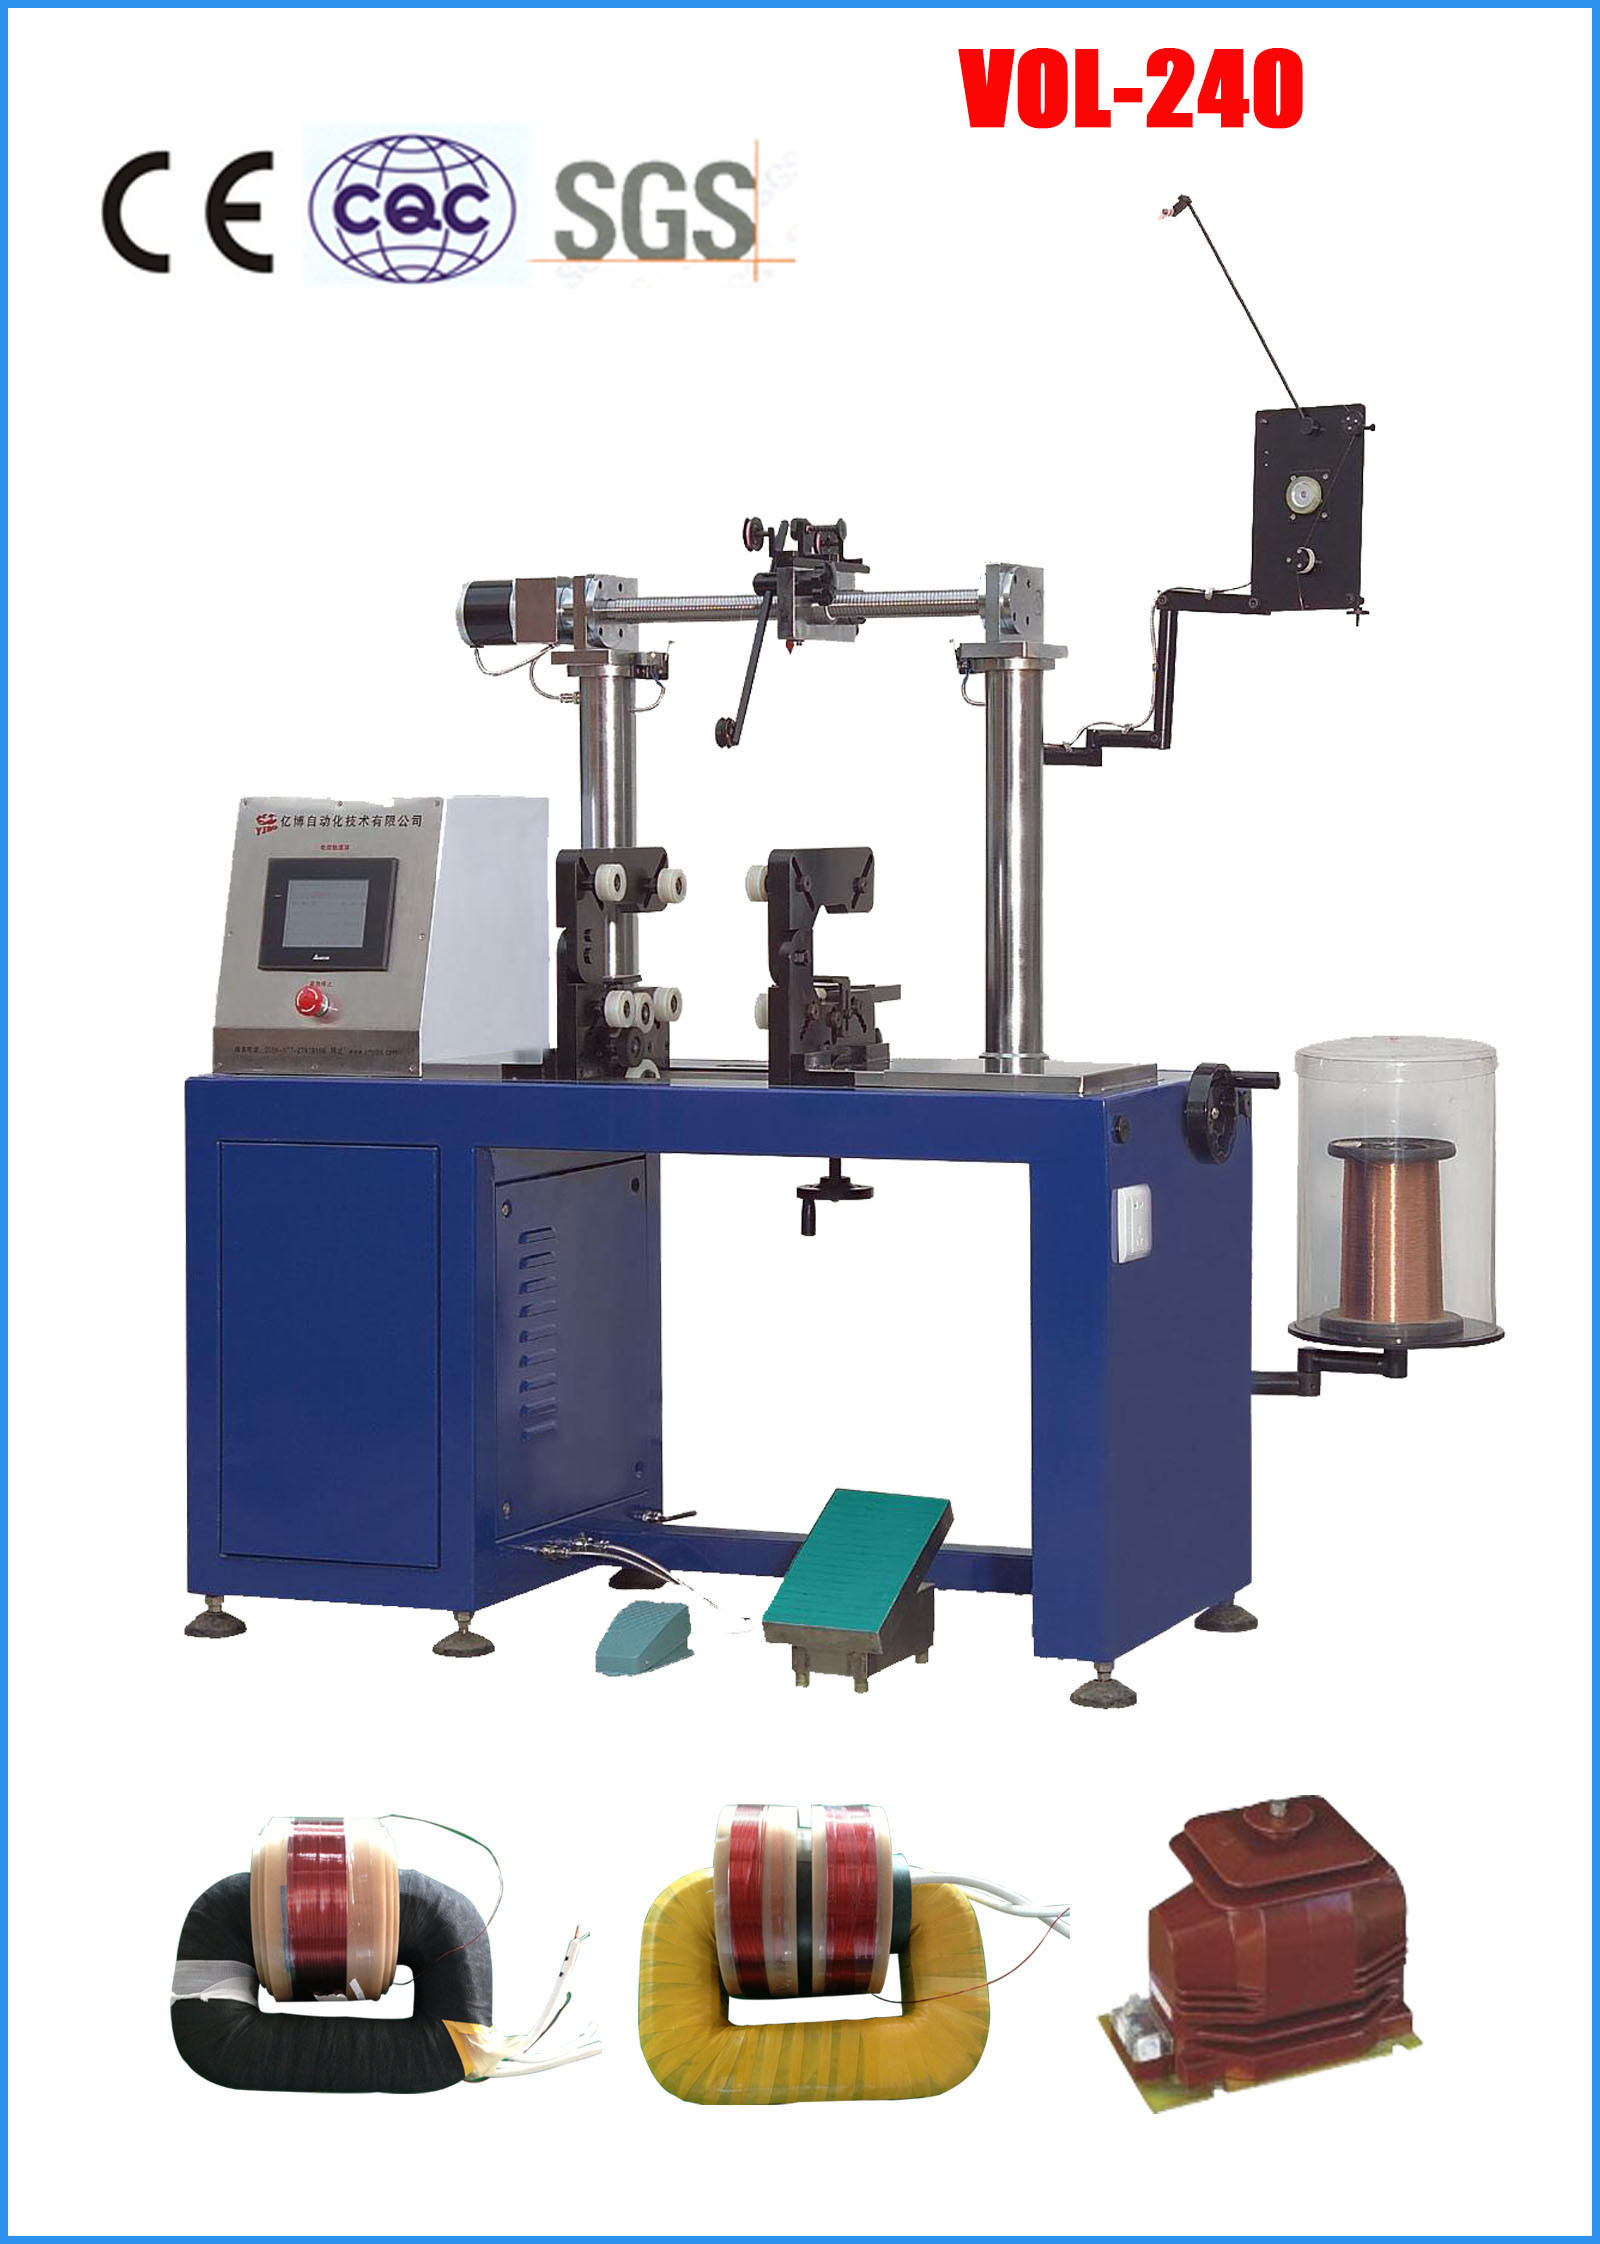 Wholesale CNC coil winding machine for voltage transformer from china suppliers